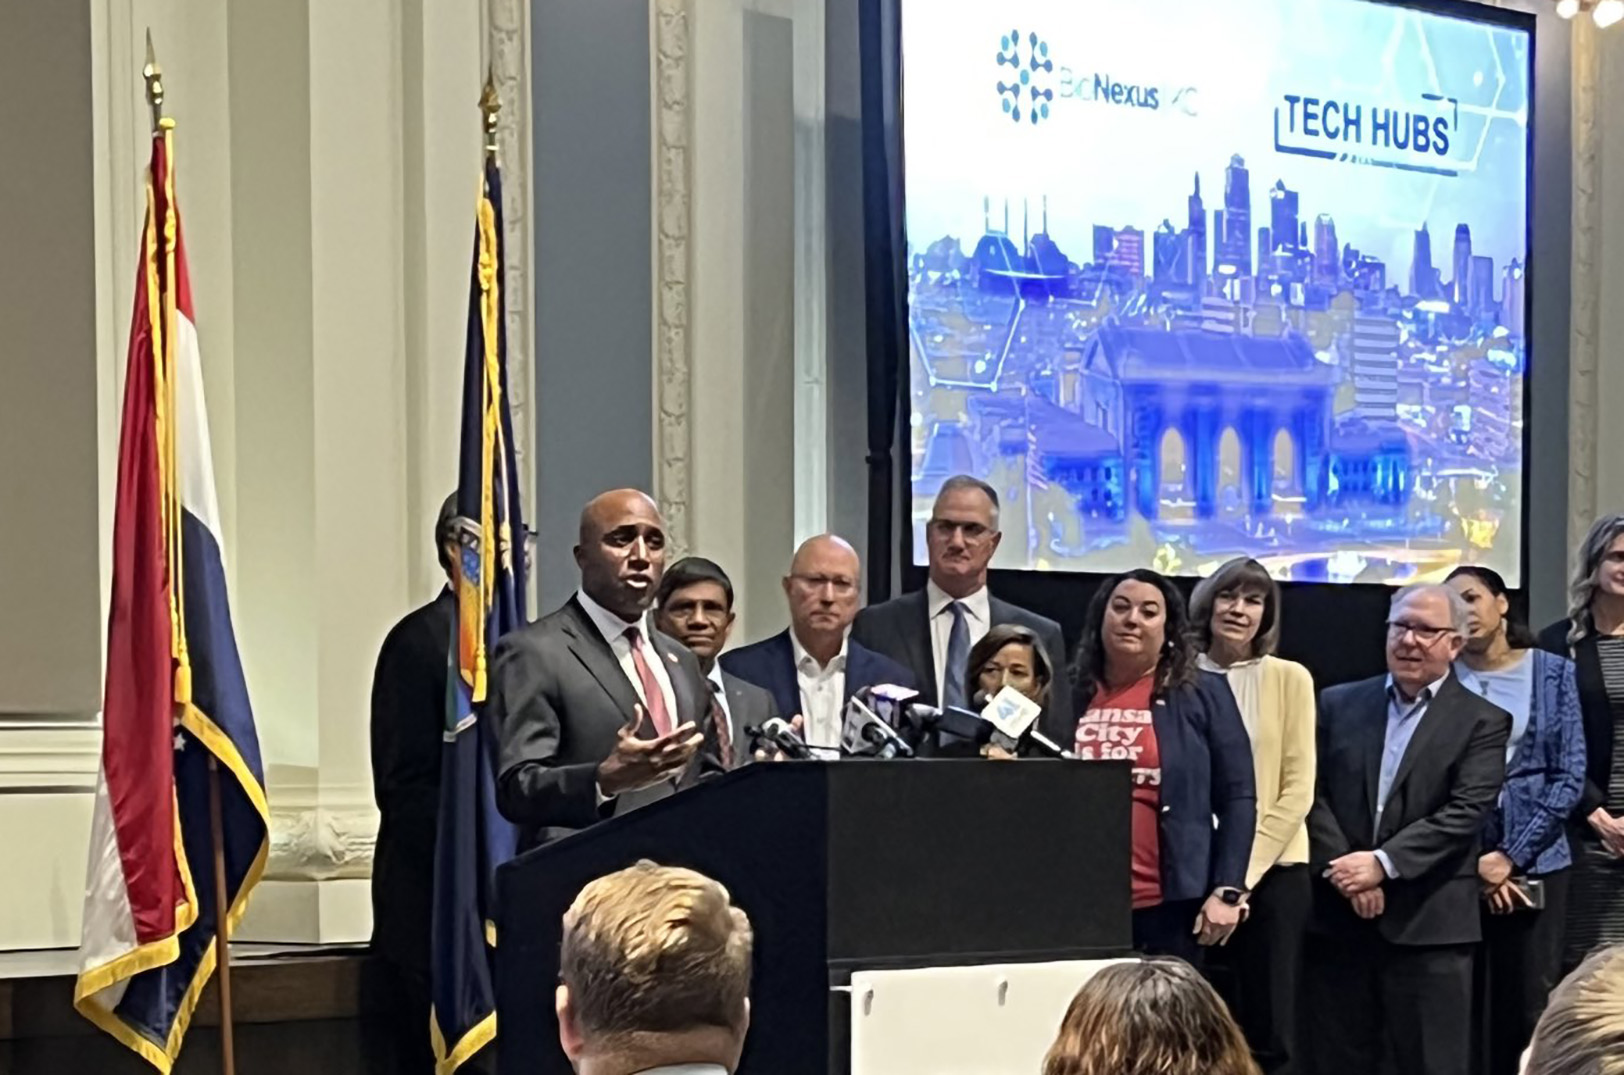 KC officially earns title of ‘Tech Hub,’ opening door to massive federal grant funding